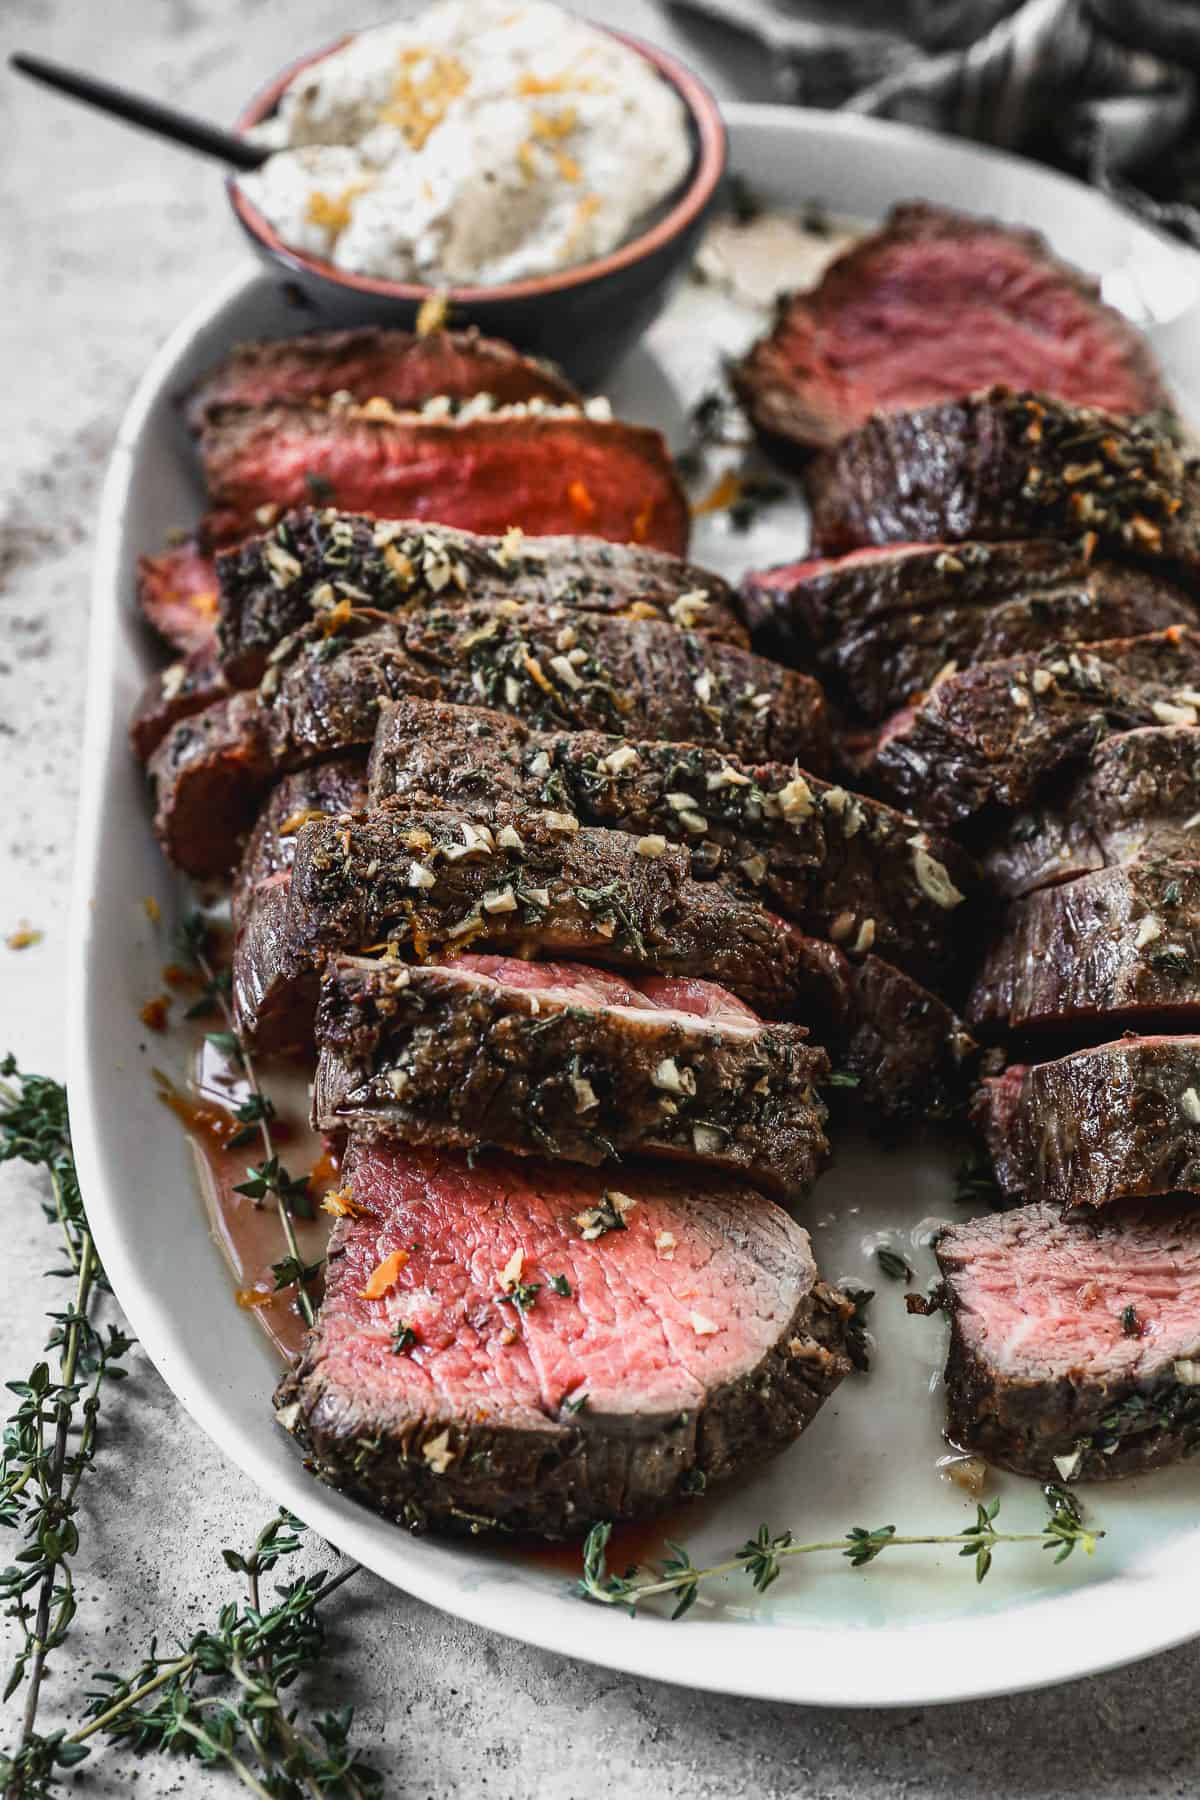 A simple Beef Tenderloin recipe, sliced and placed on a platter, ready to enjoy.